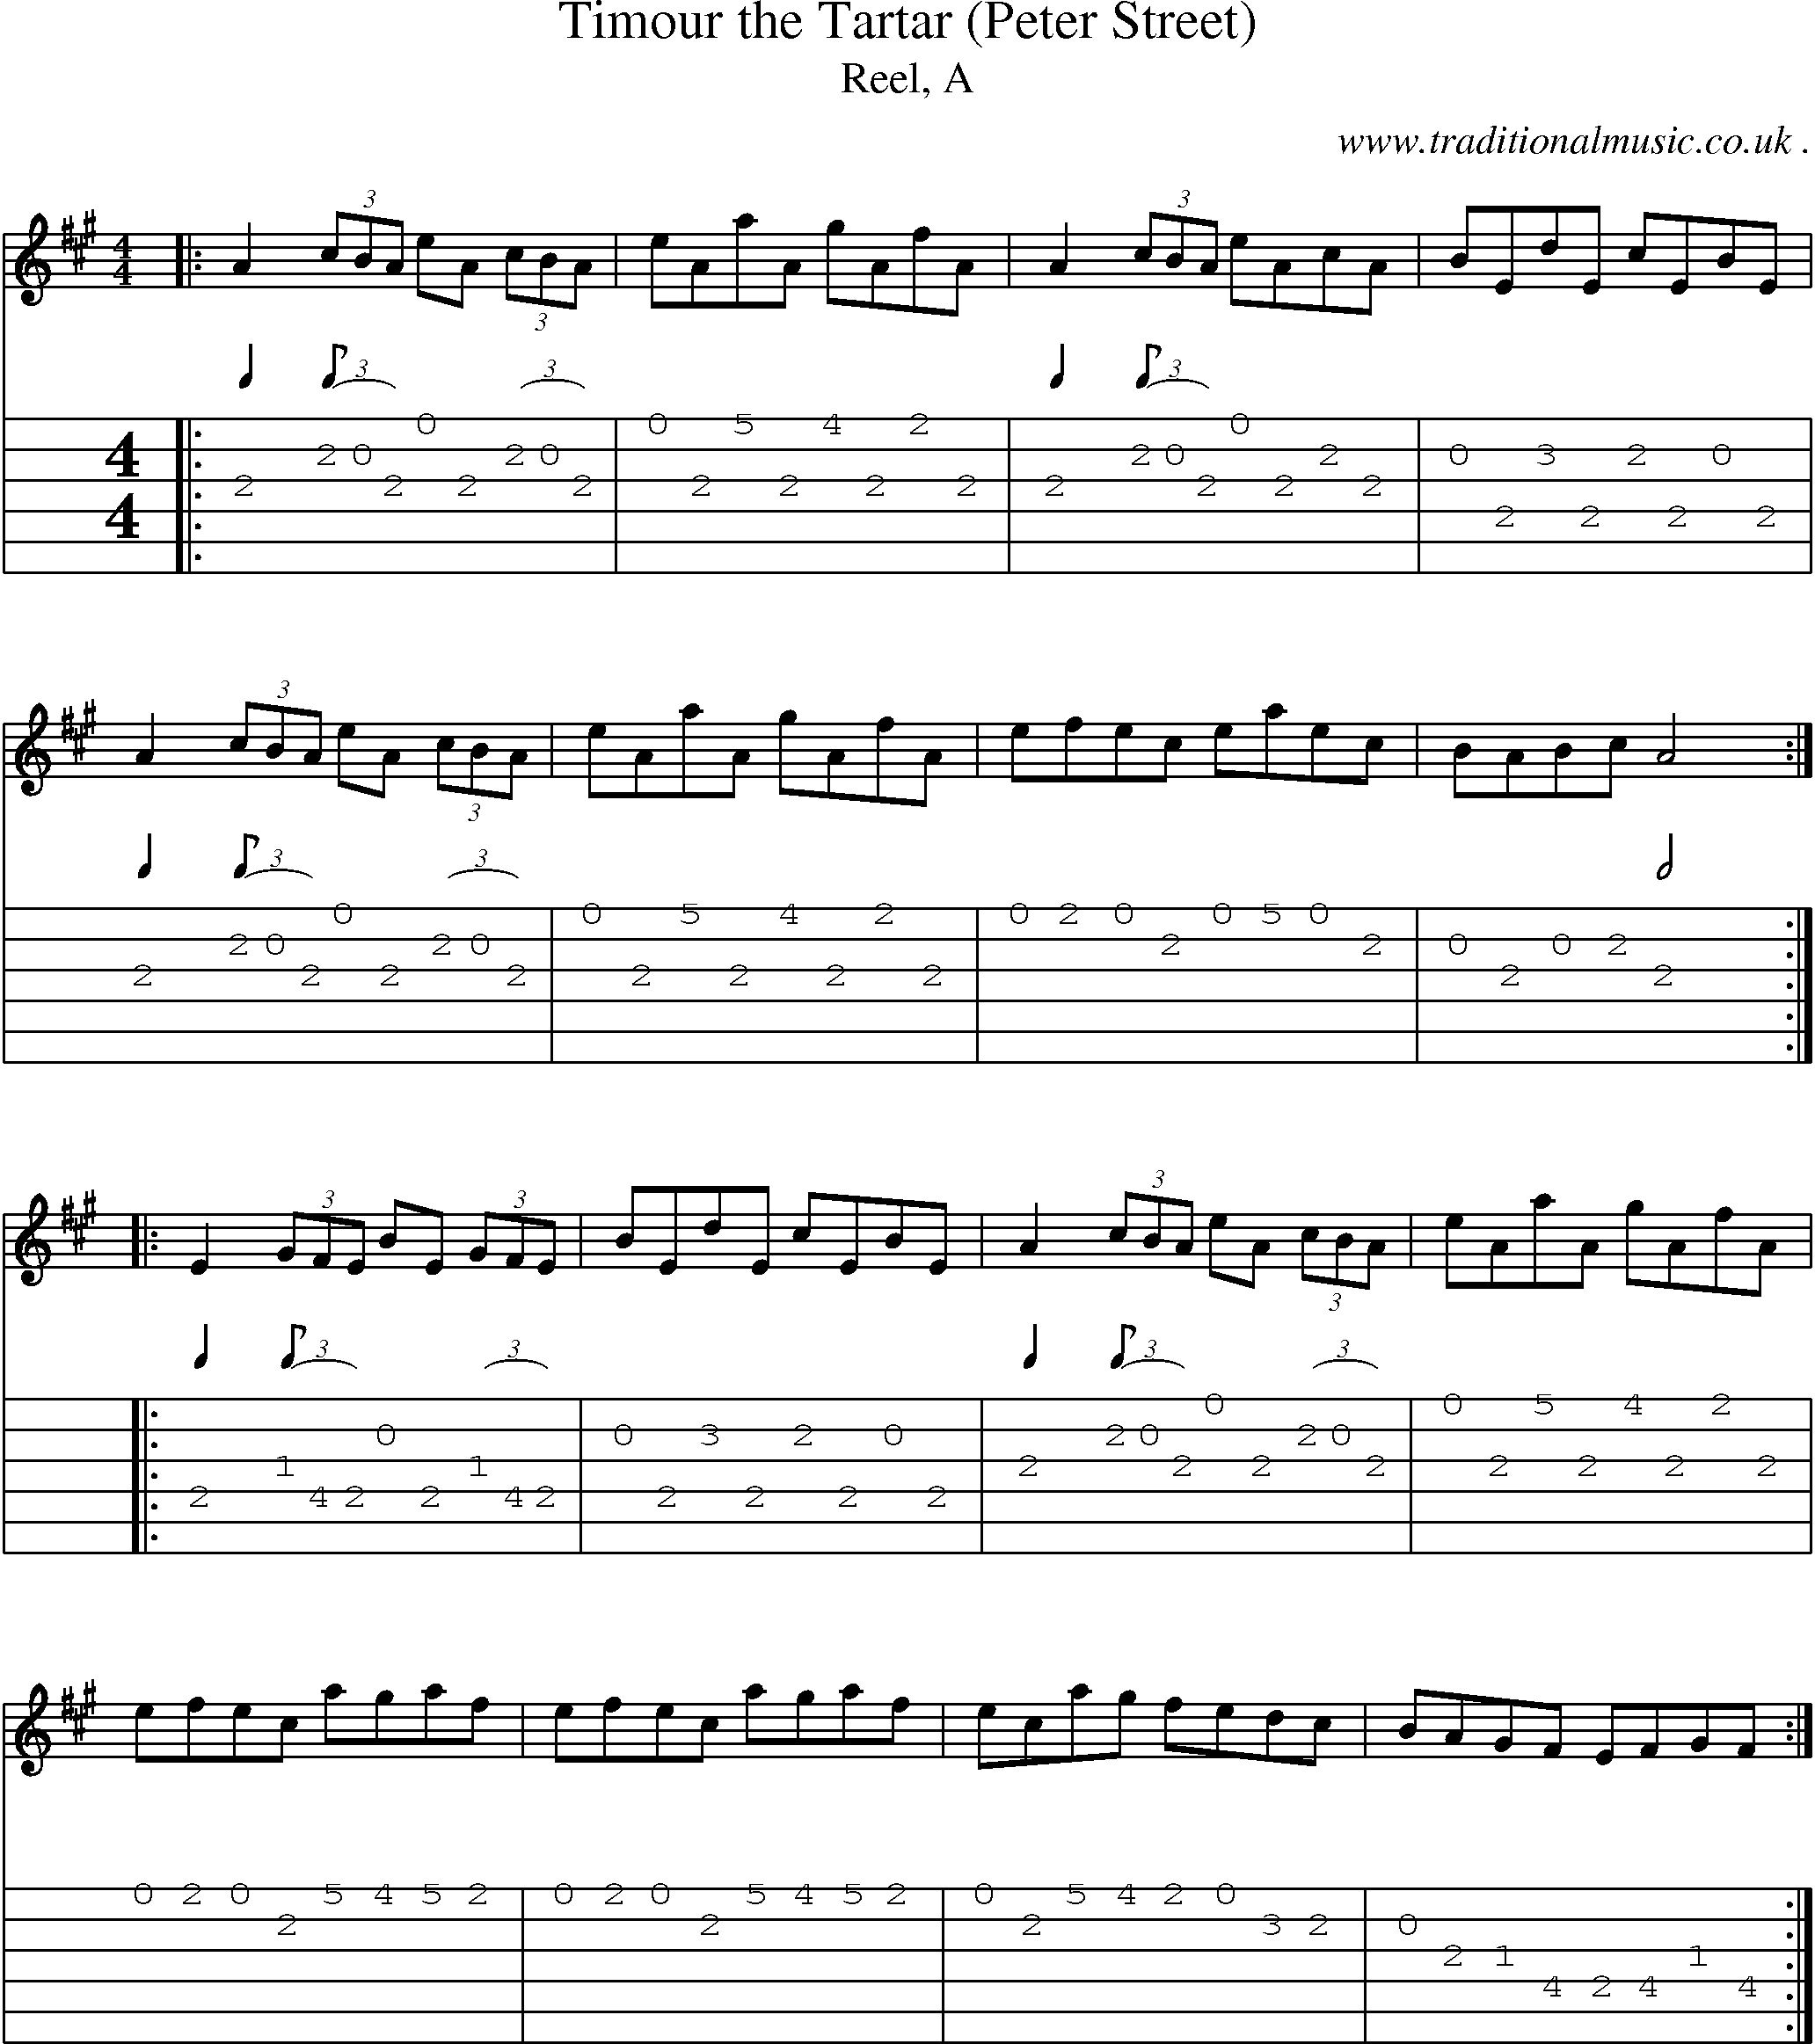 Sheet-music  score, Chords and Guitar Tabs for Timour The Tartar Peter Street